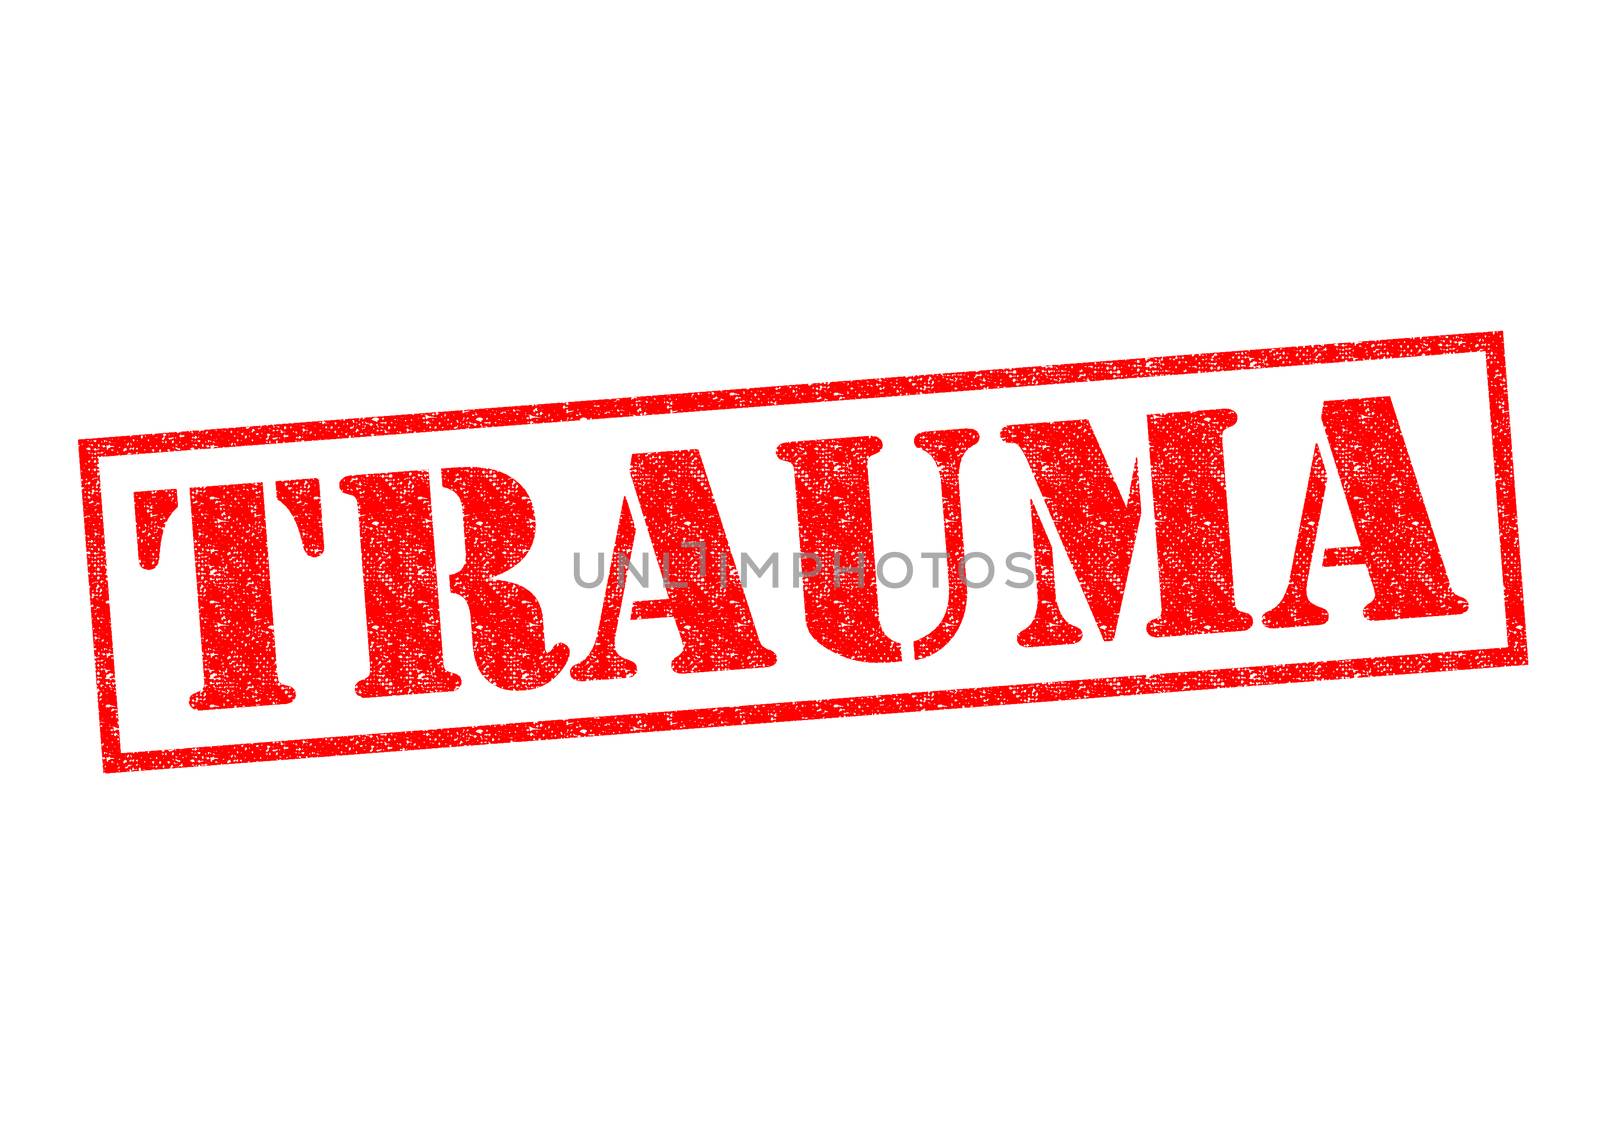 TRAUMA red Rubber Stamp over a white background.